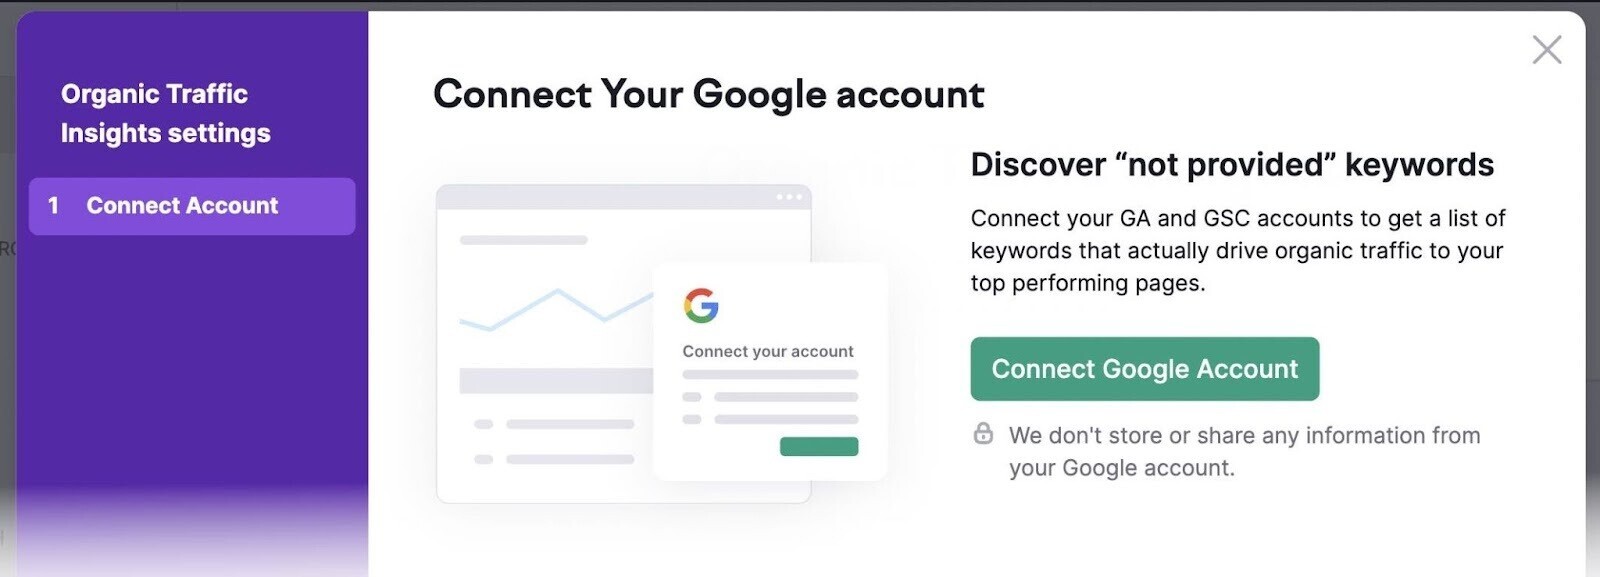 connect your Google account